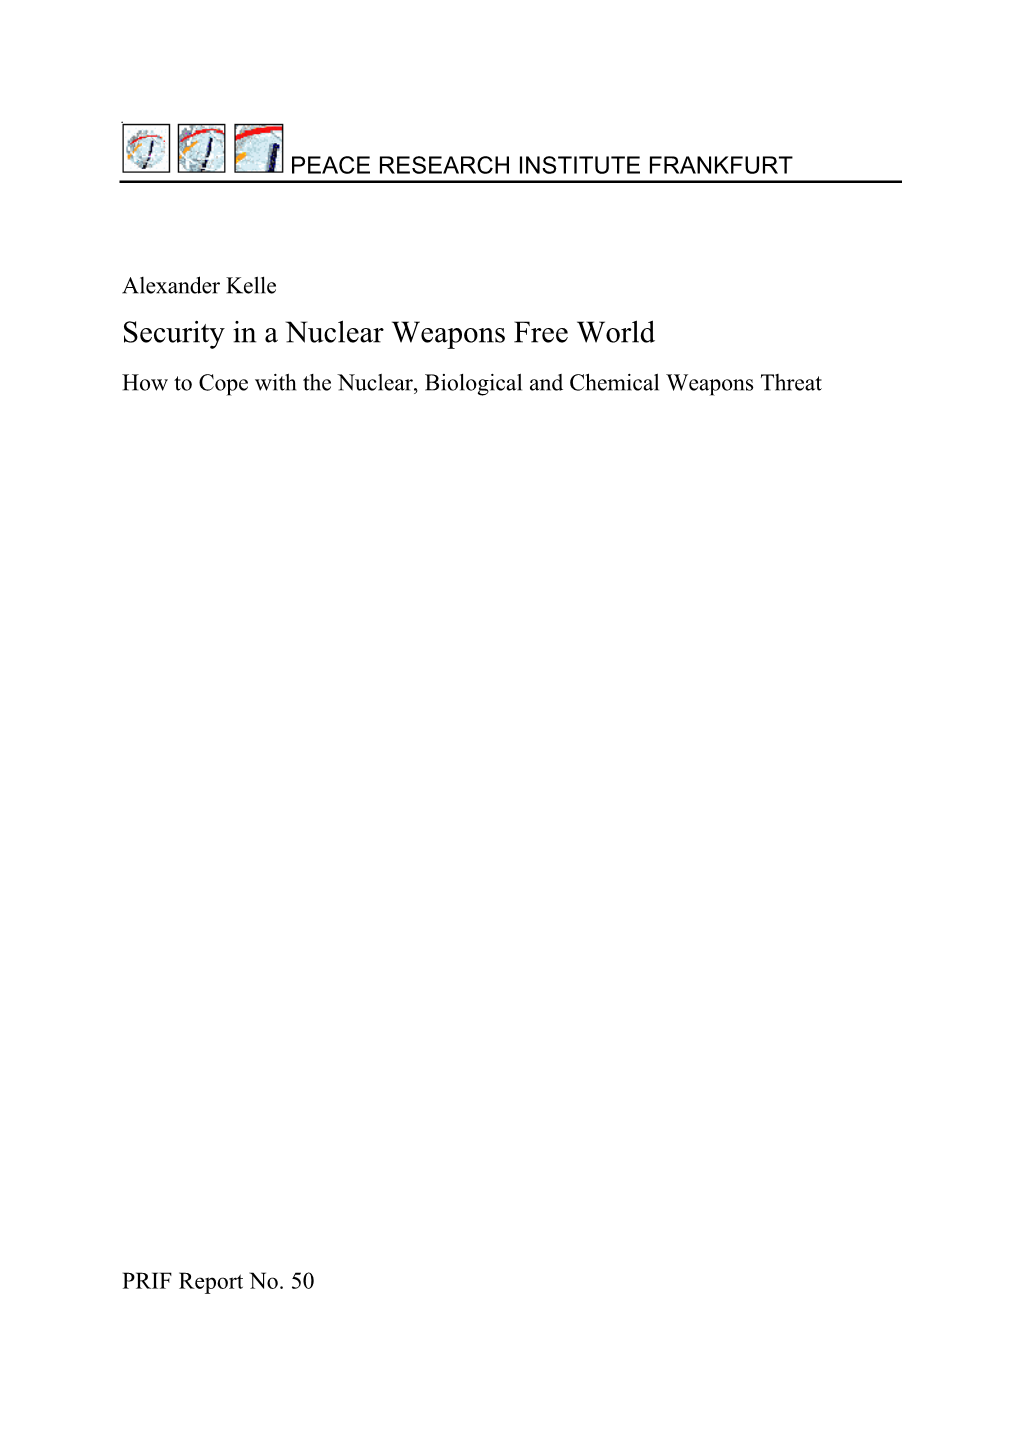 Security in a Nuclear Weapons Free World How to Cope with the Nuclear, Biological and Chemical Weapons Threat